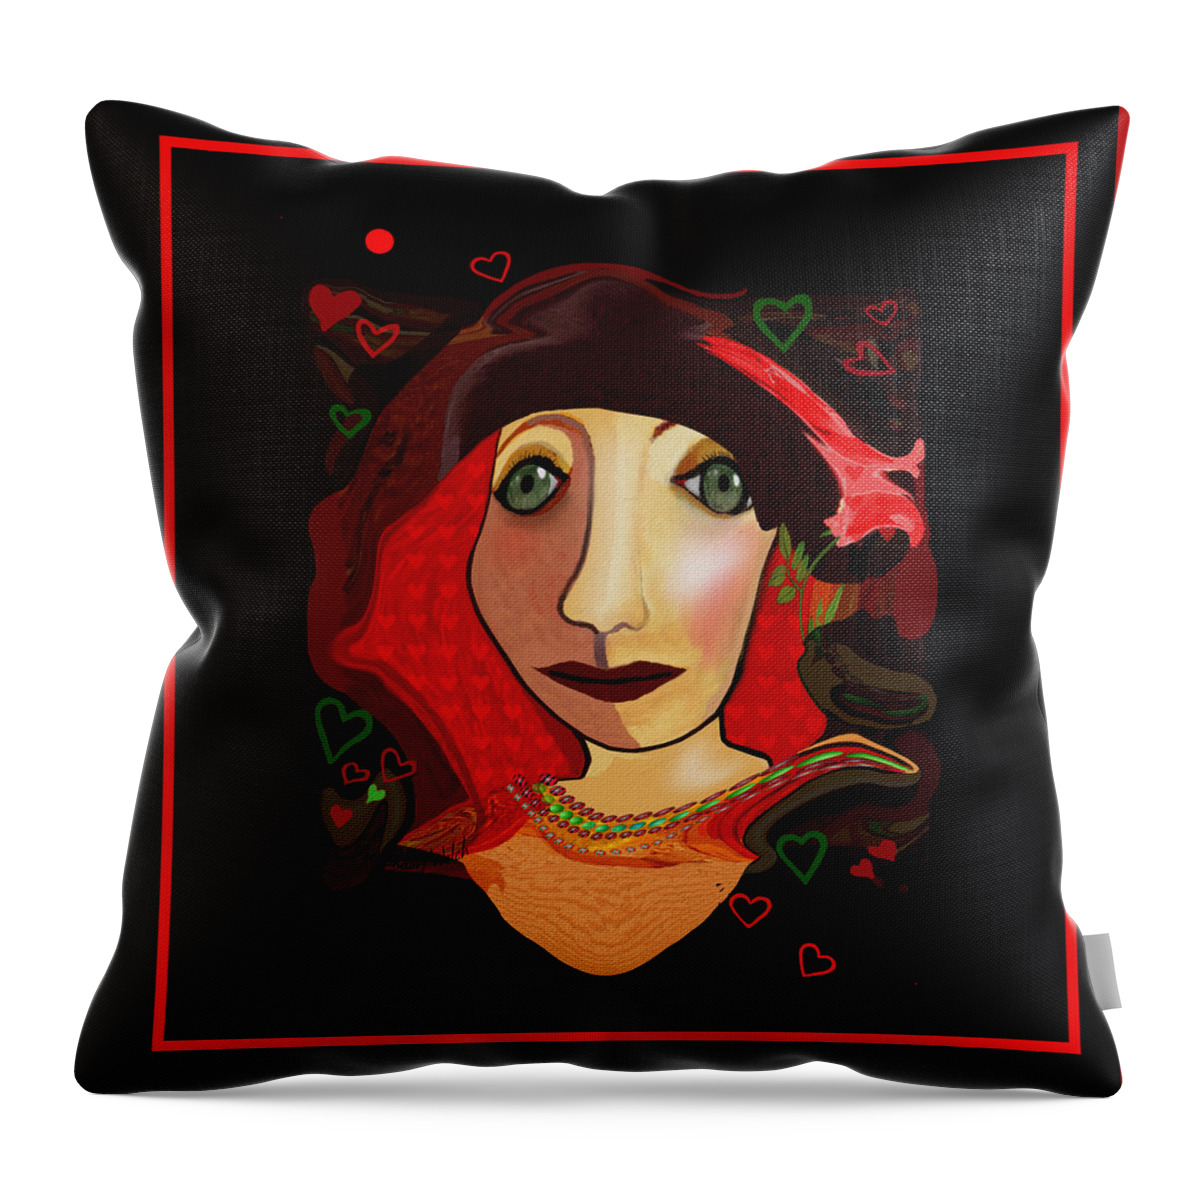 1648 Throw Pillow featuring the digital art 1648 - Portrait 2017 by Irmgard Schoendorf Welch